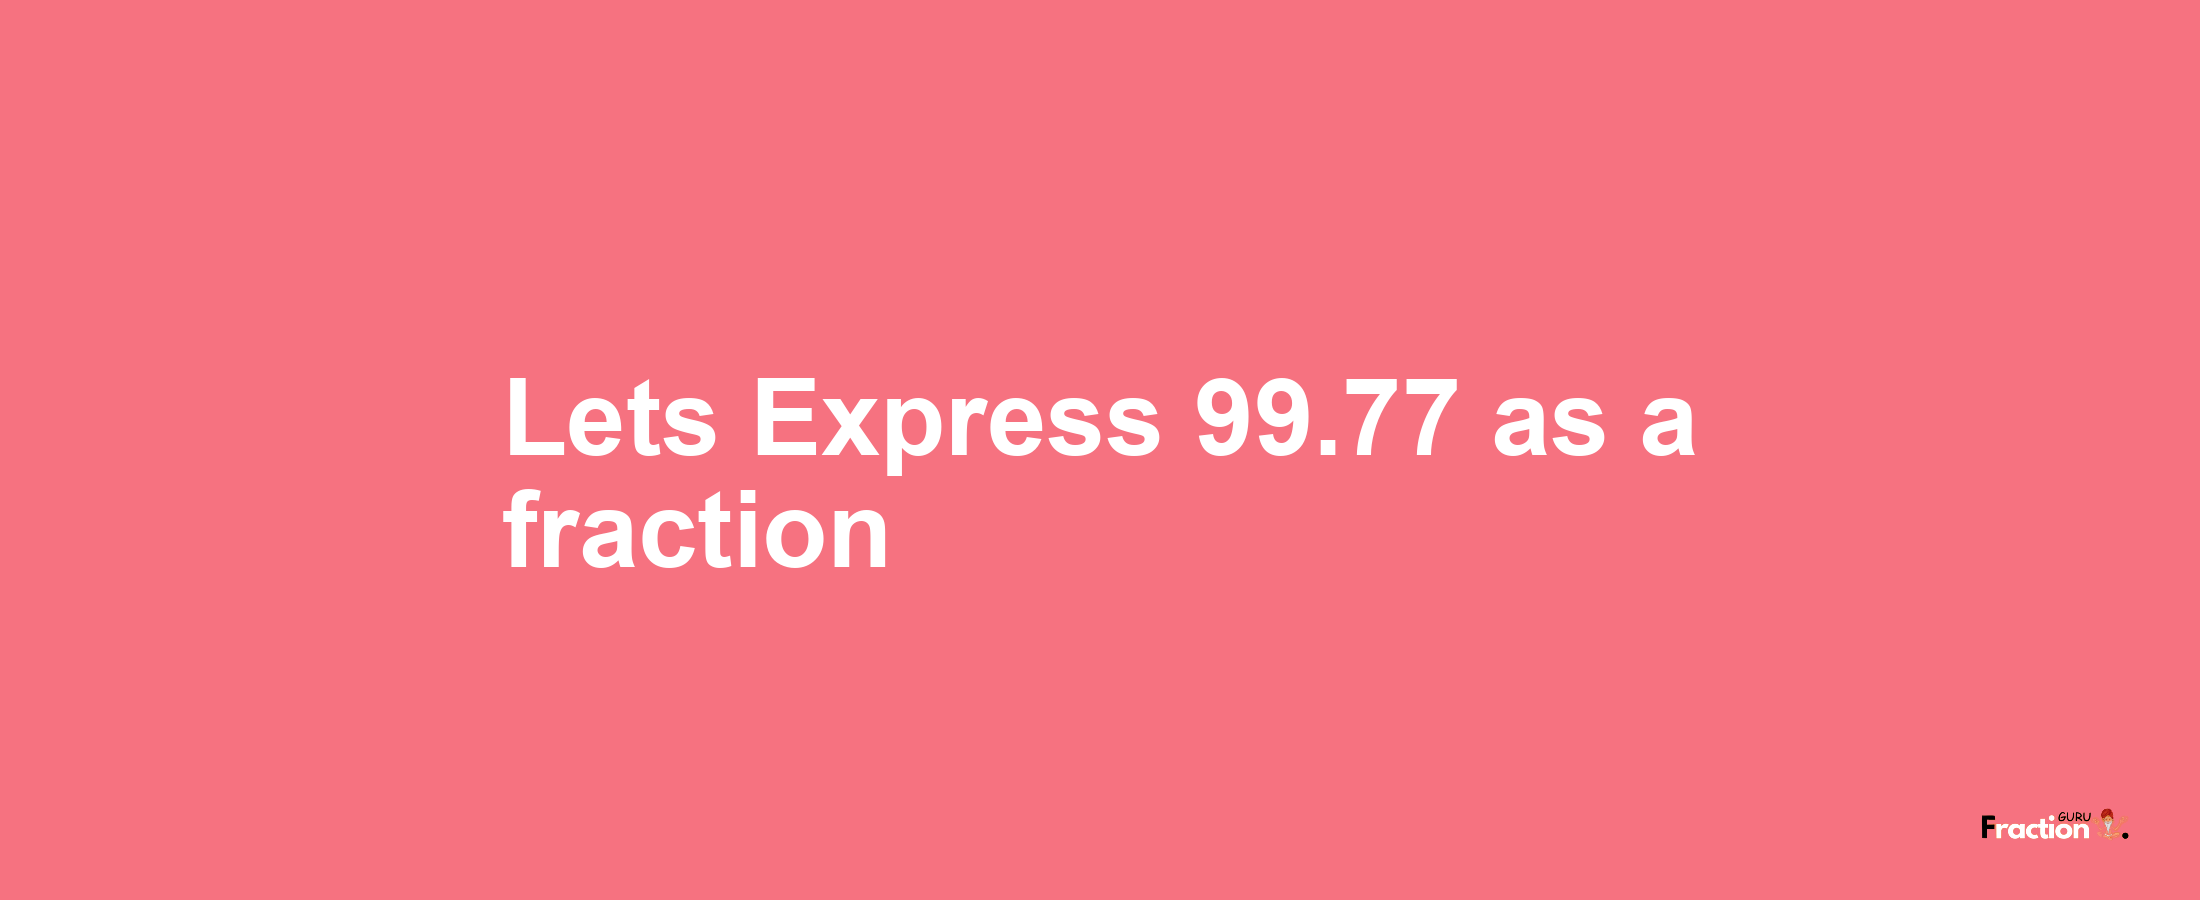 Lets Express 99.77 as afraction